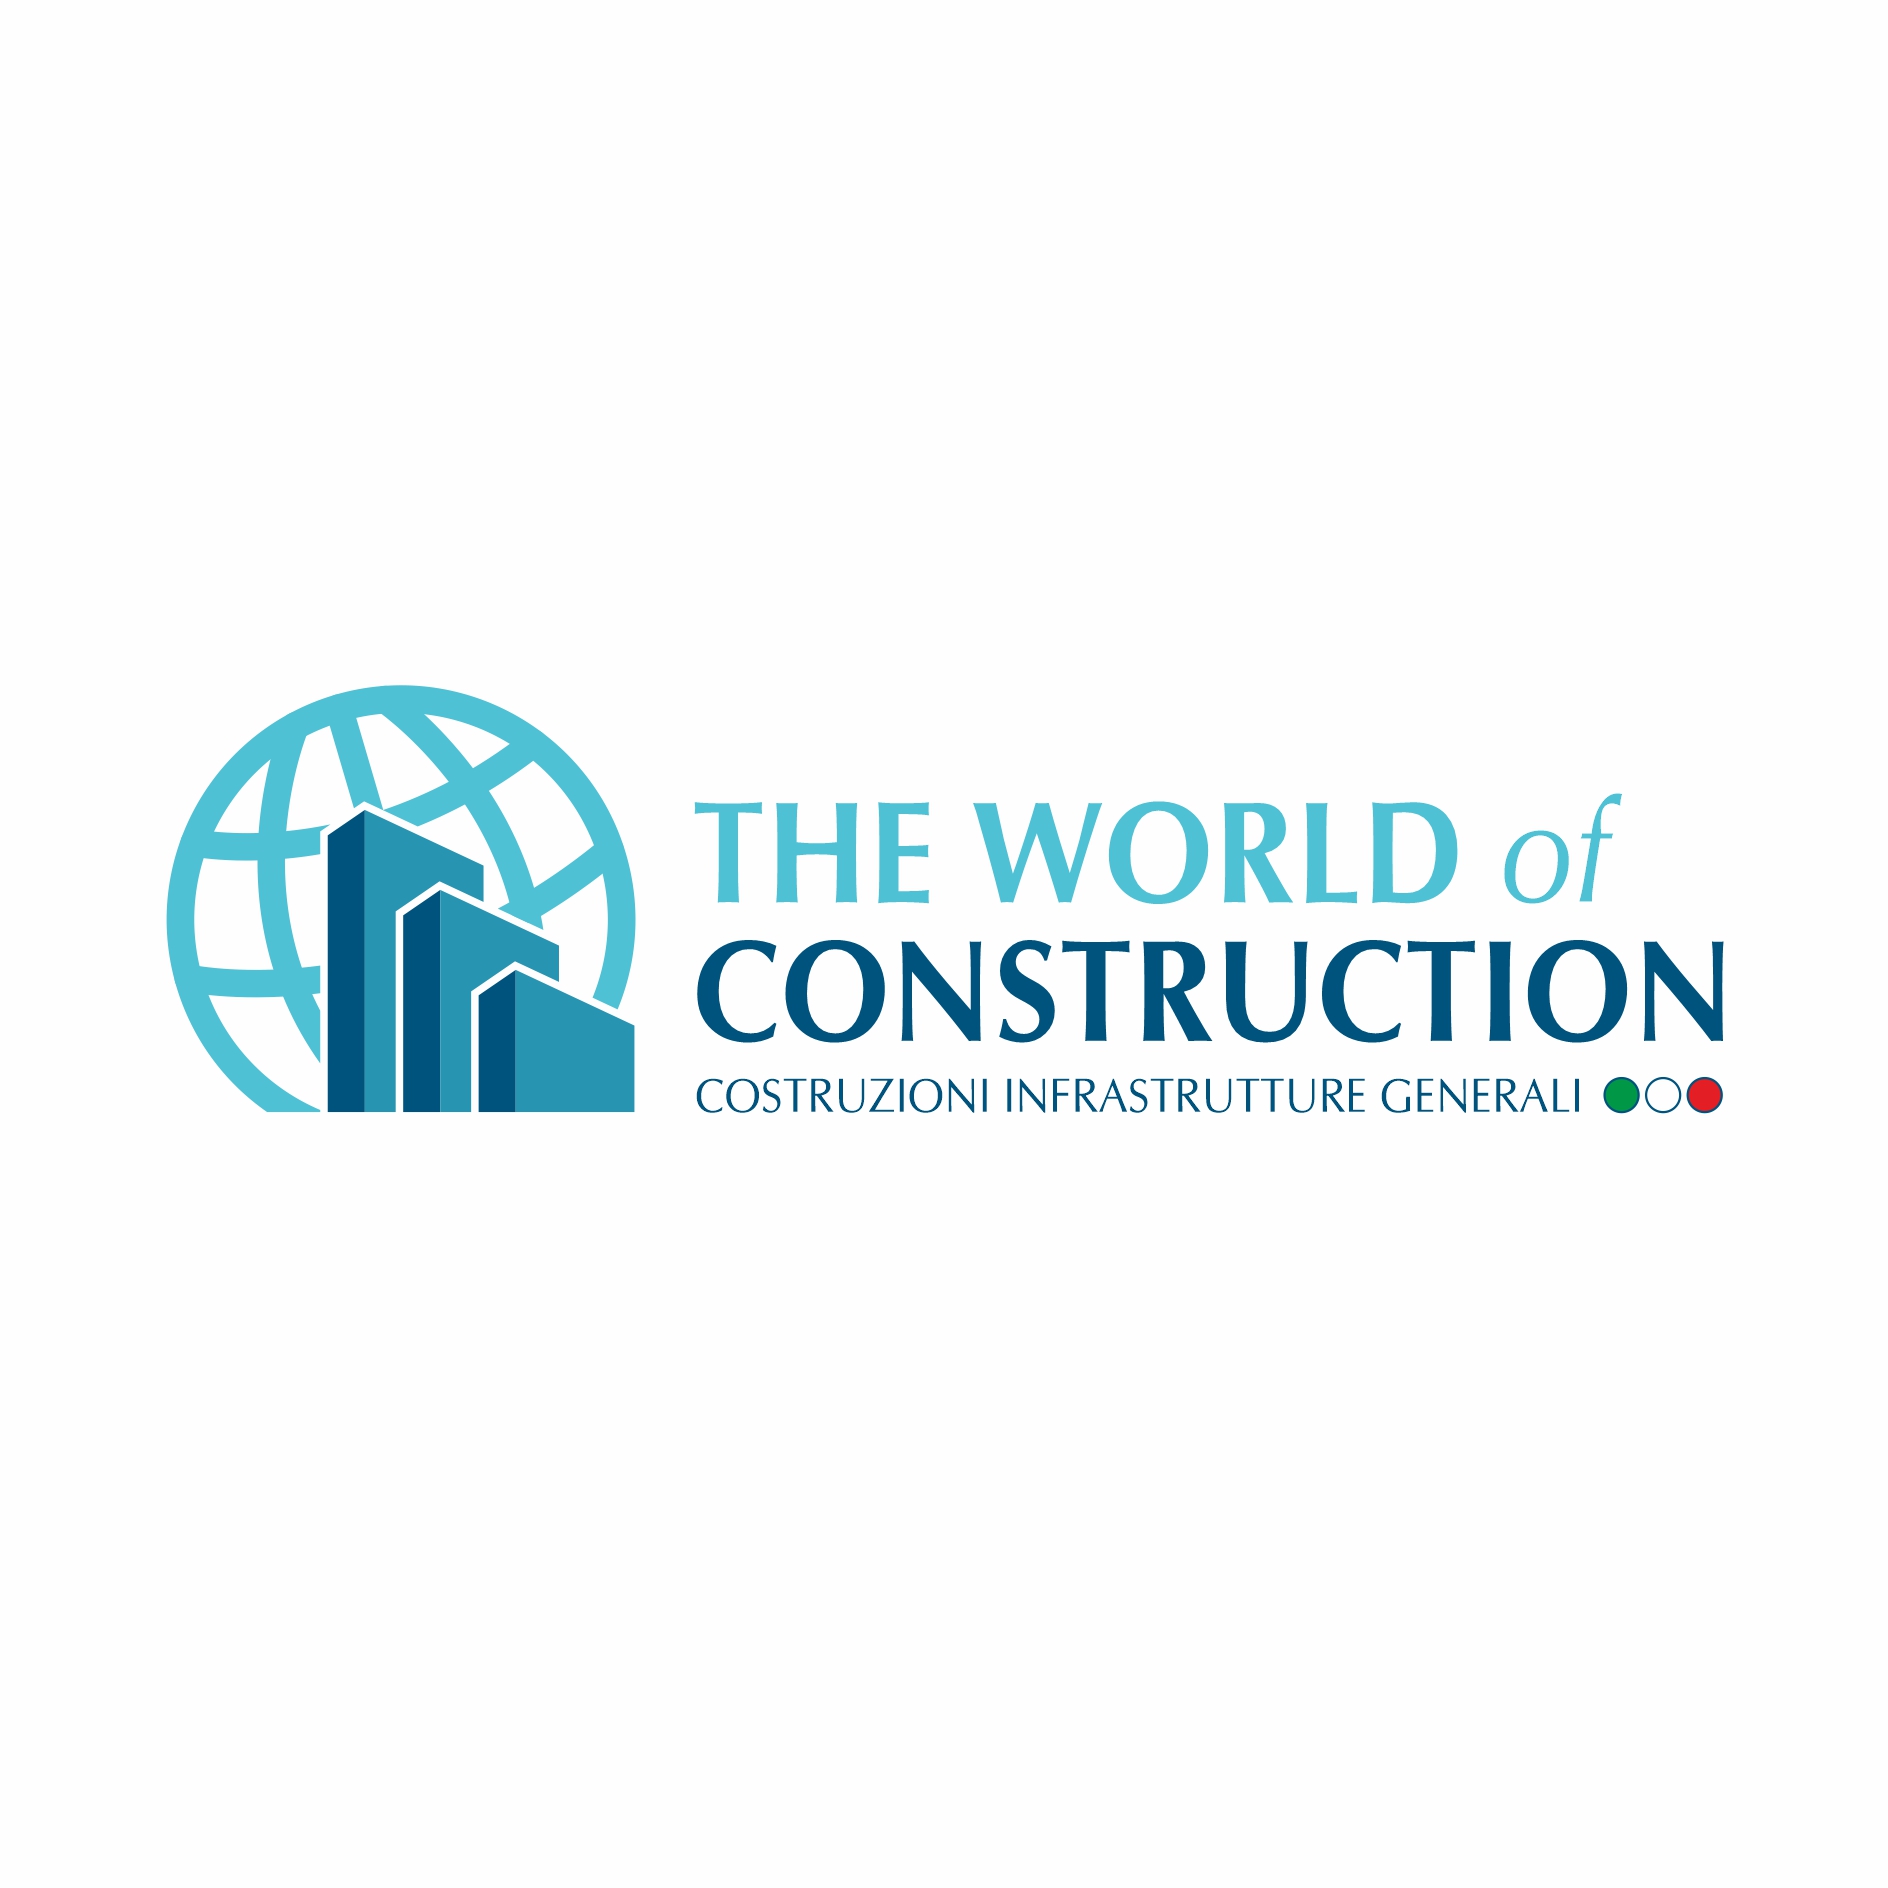 The World of Construction